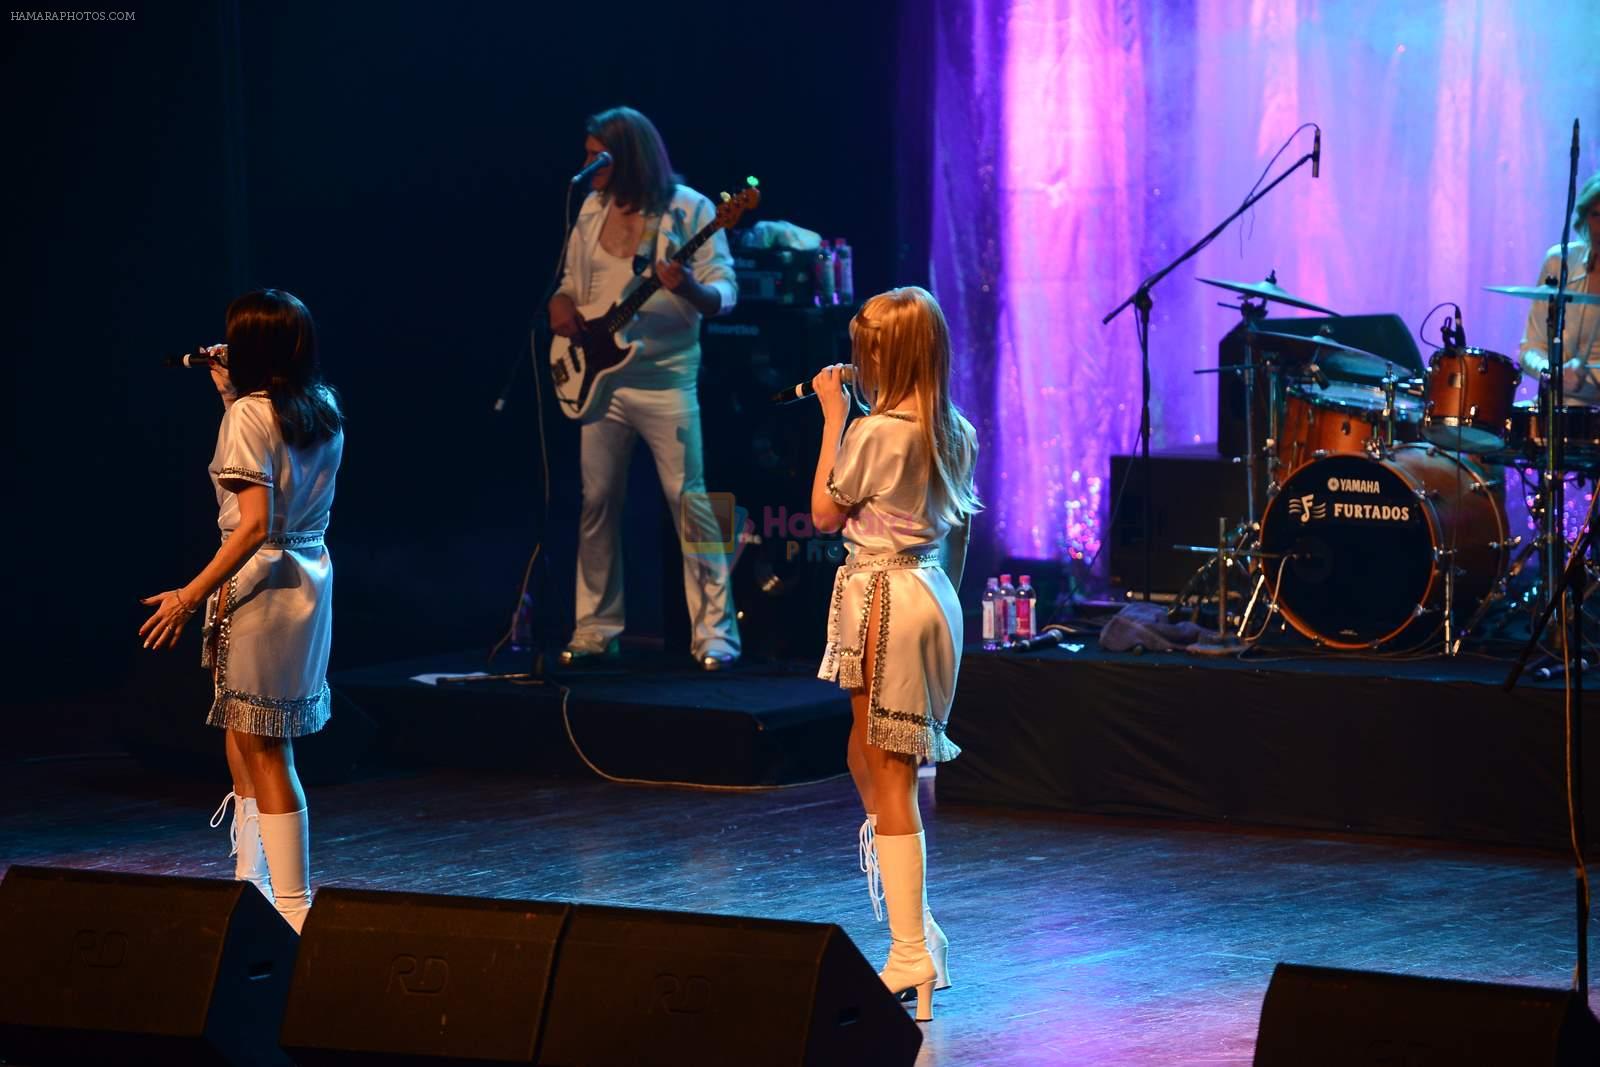 at Abba Tribute concert in NCPA on 21st June 2015